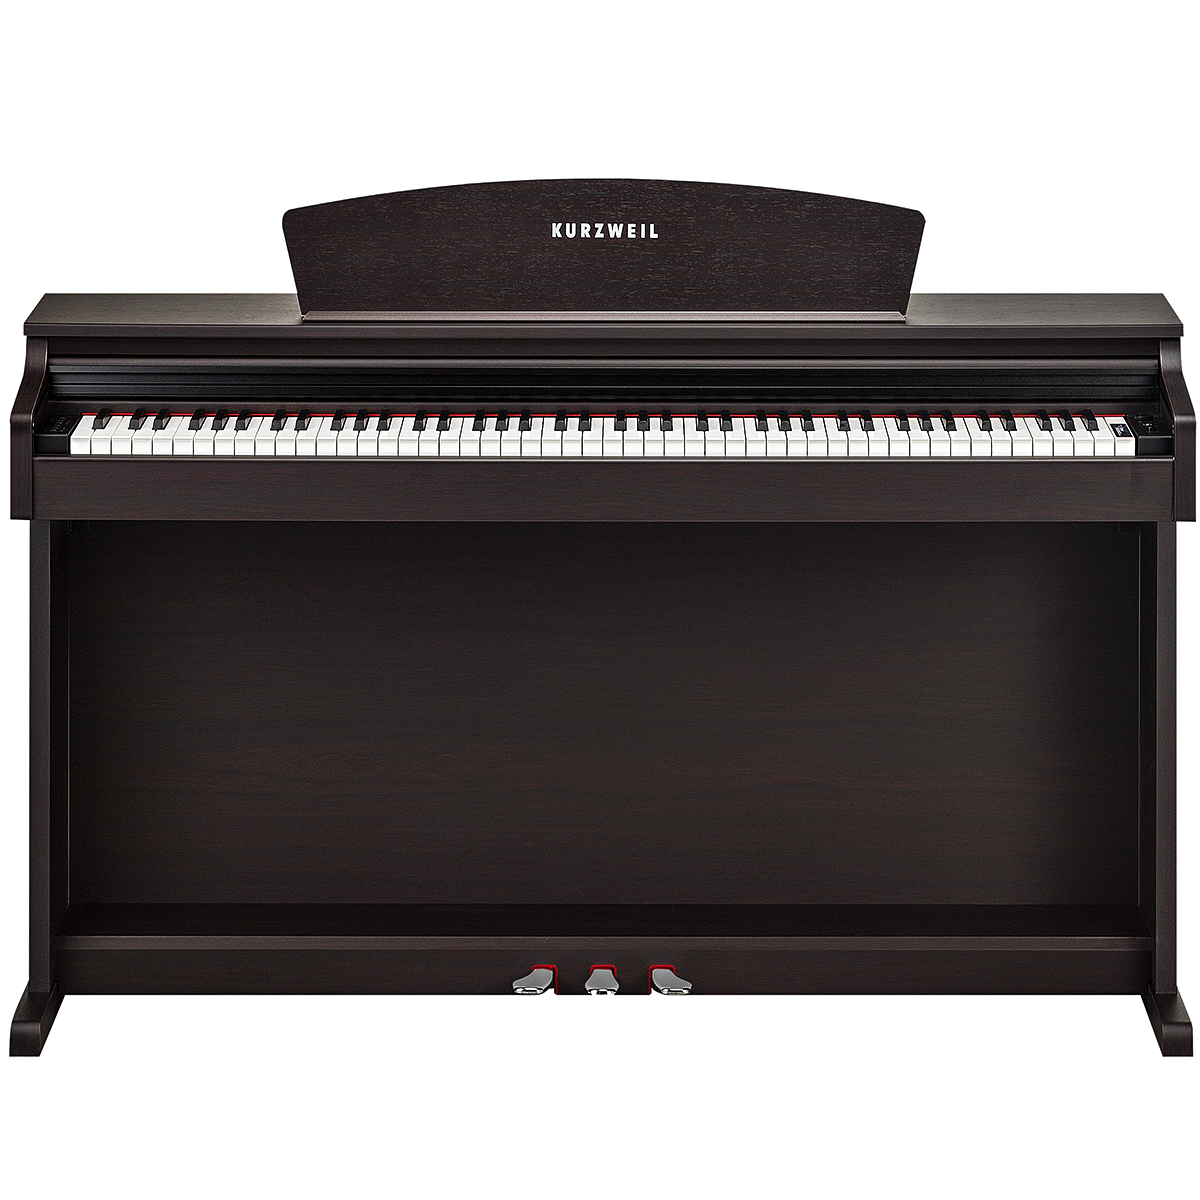 KURZWEIL M110SR: Fully-Weighted, 88 Note, Hammer-Action Digital Piano (Rosewood)